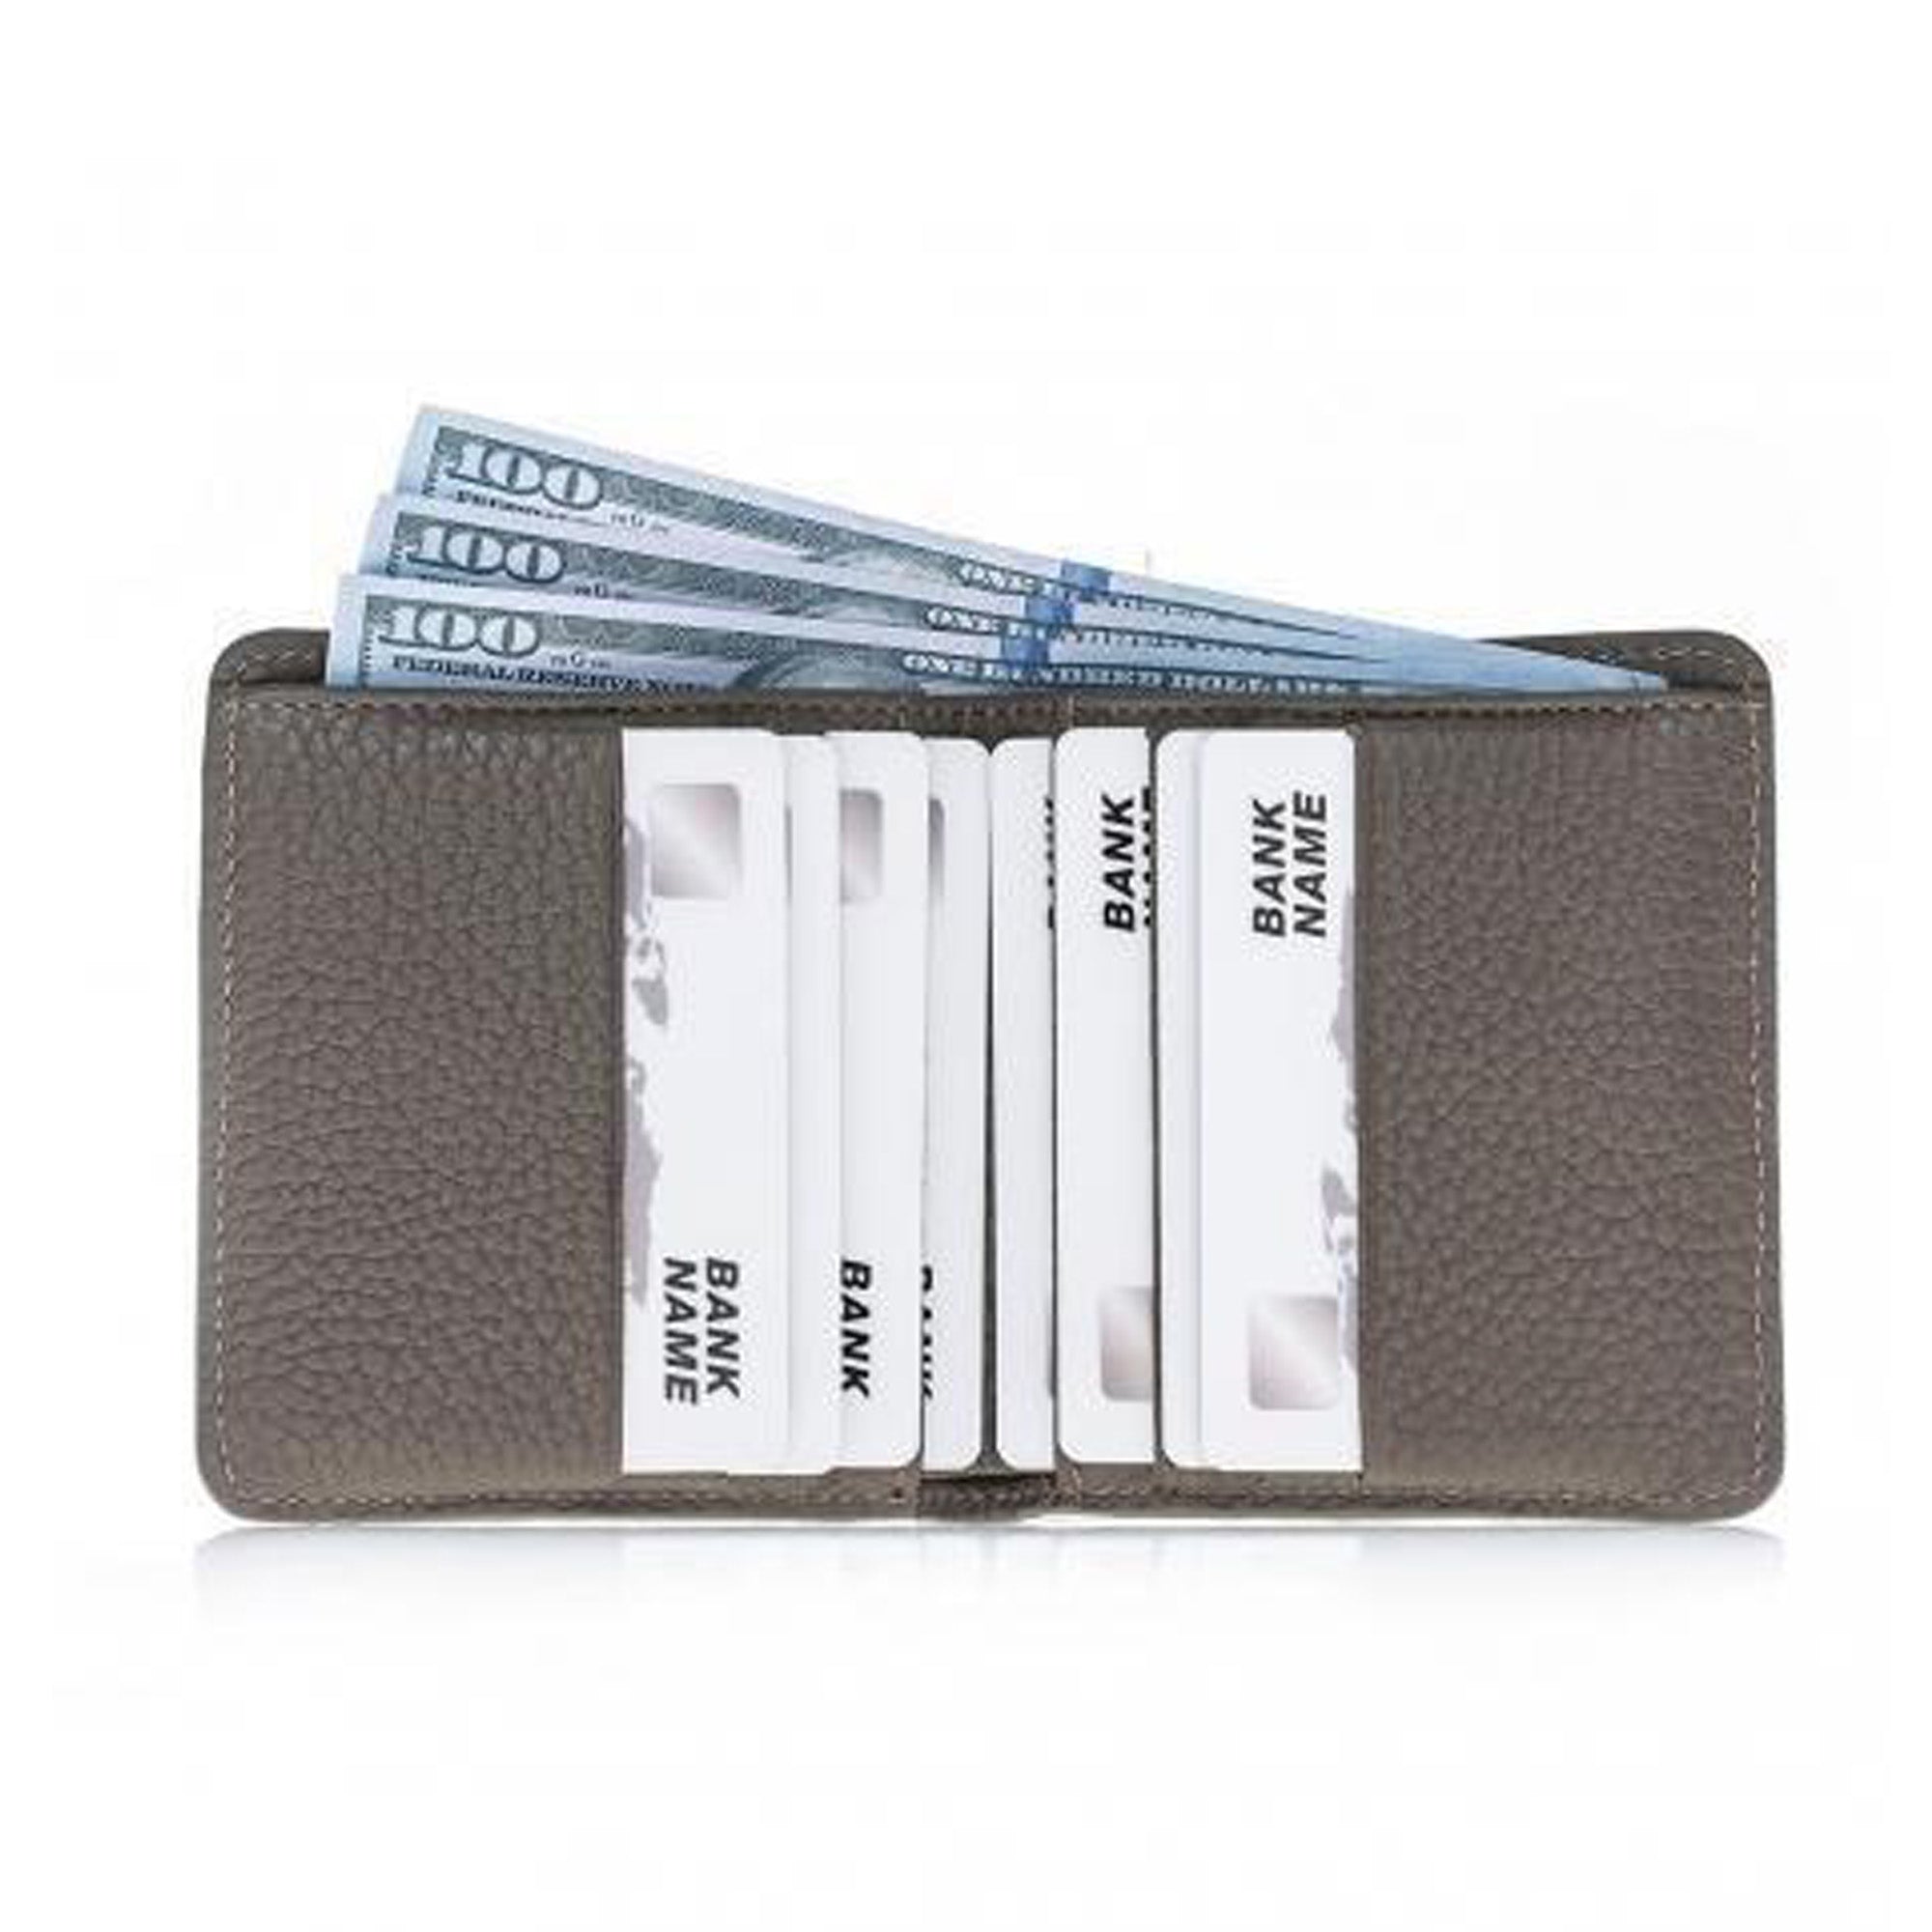 Aaron Leather Men's Bifold Wallet - GRAY - saracleather